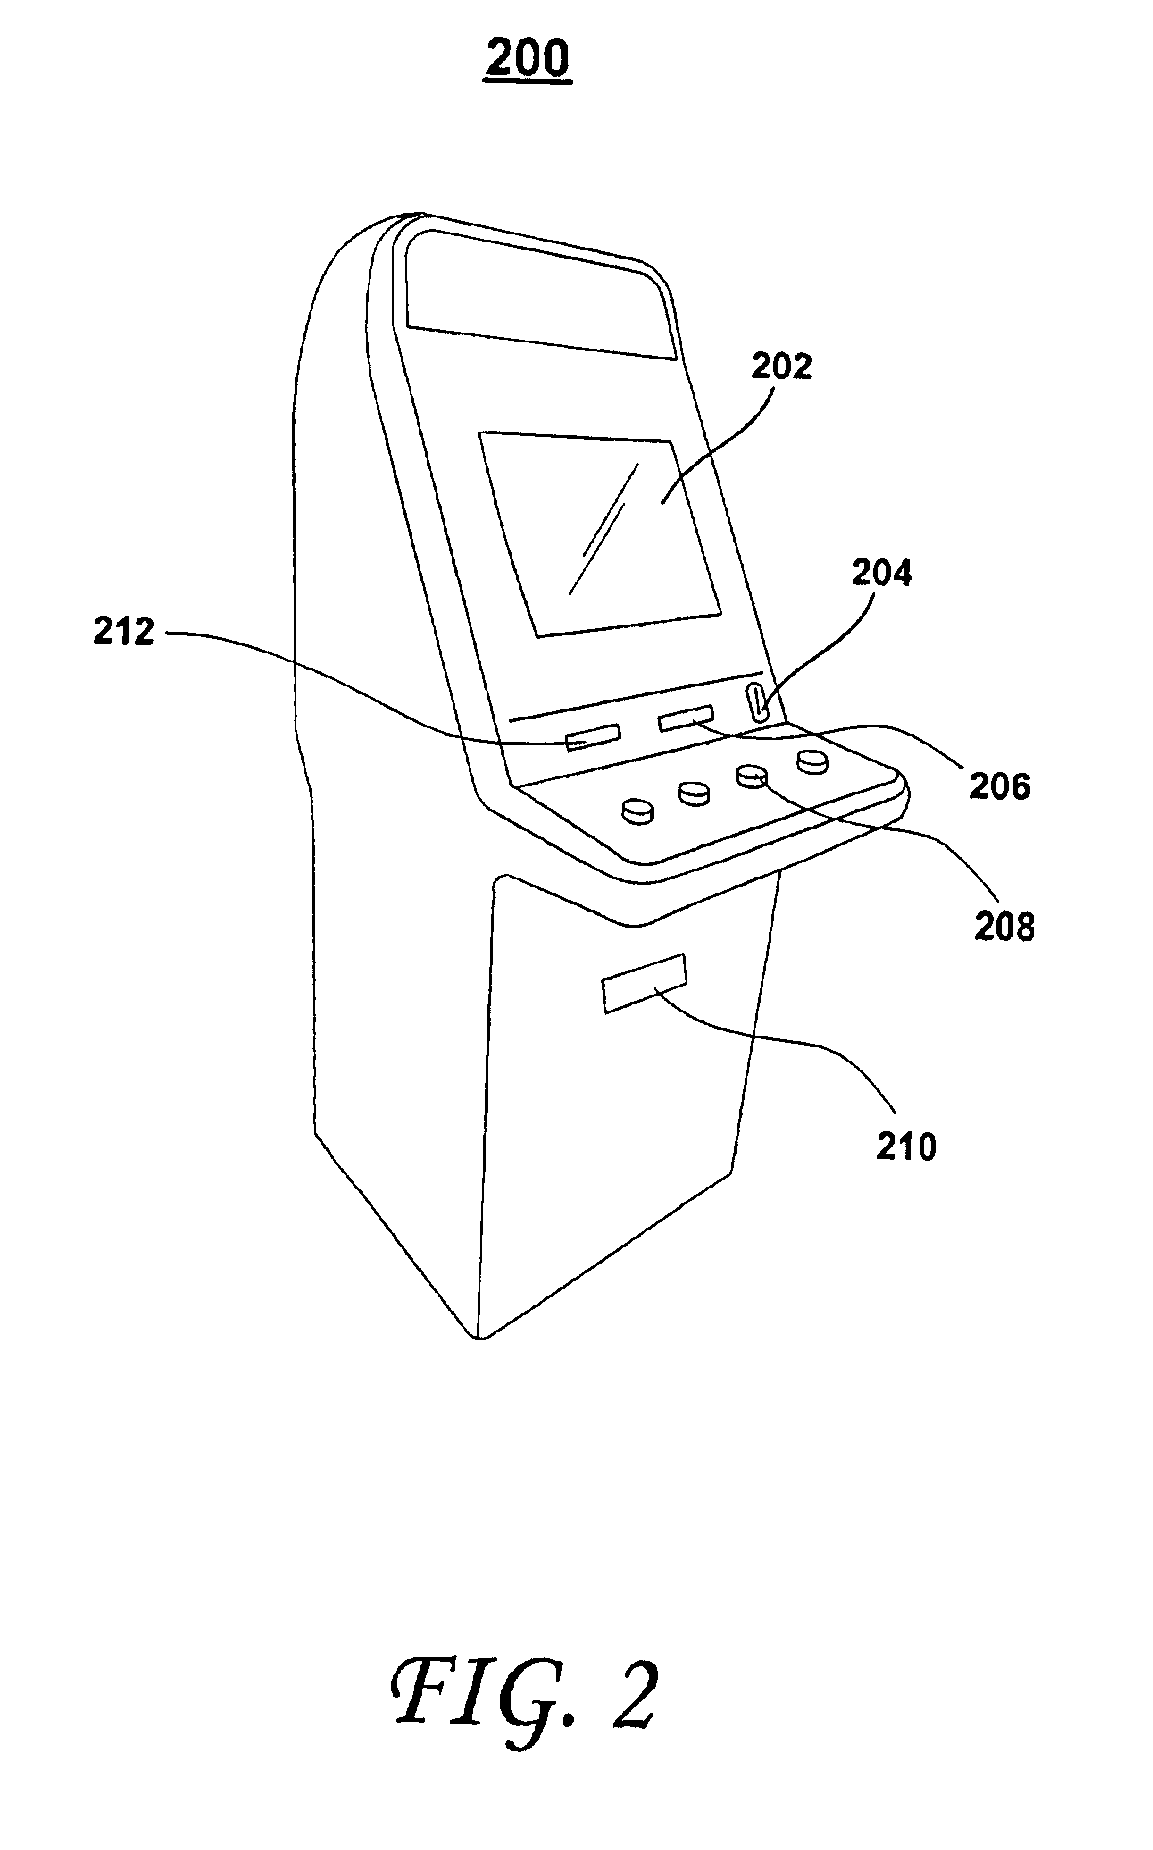 Modular entertainment and gaming system configured for processing raw biometric data and multimedia response by a remote server